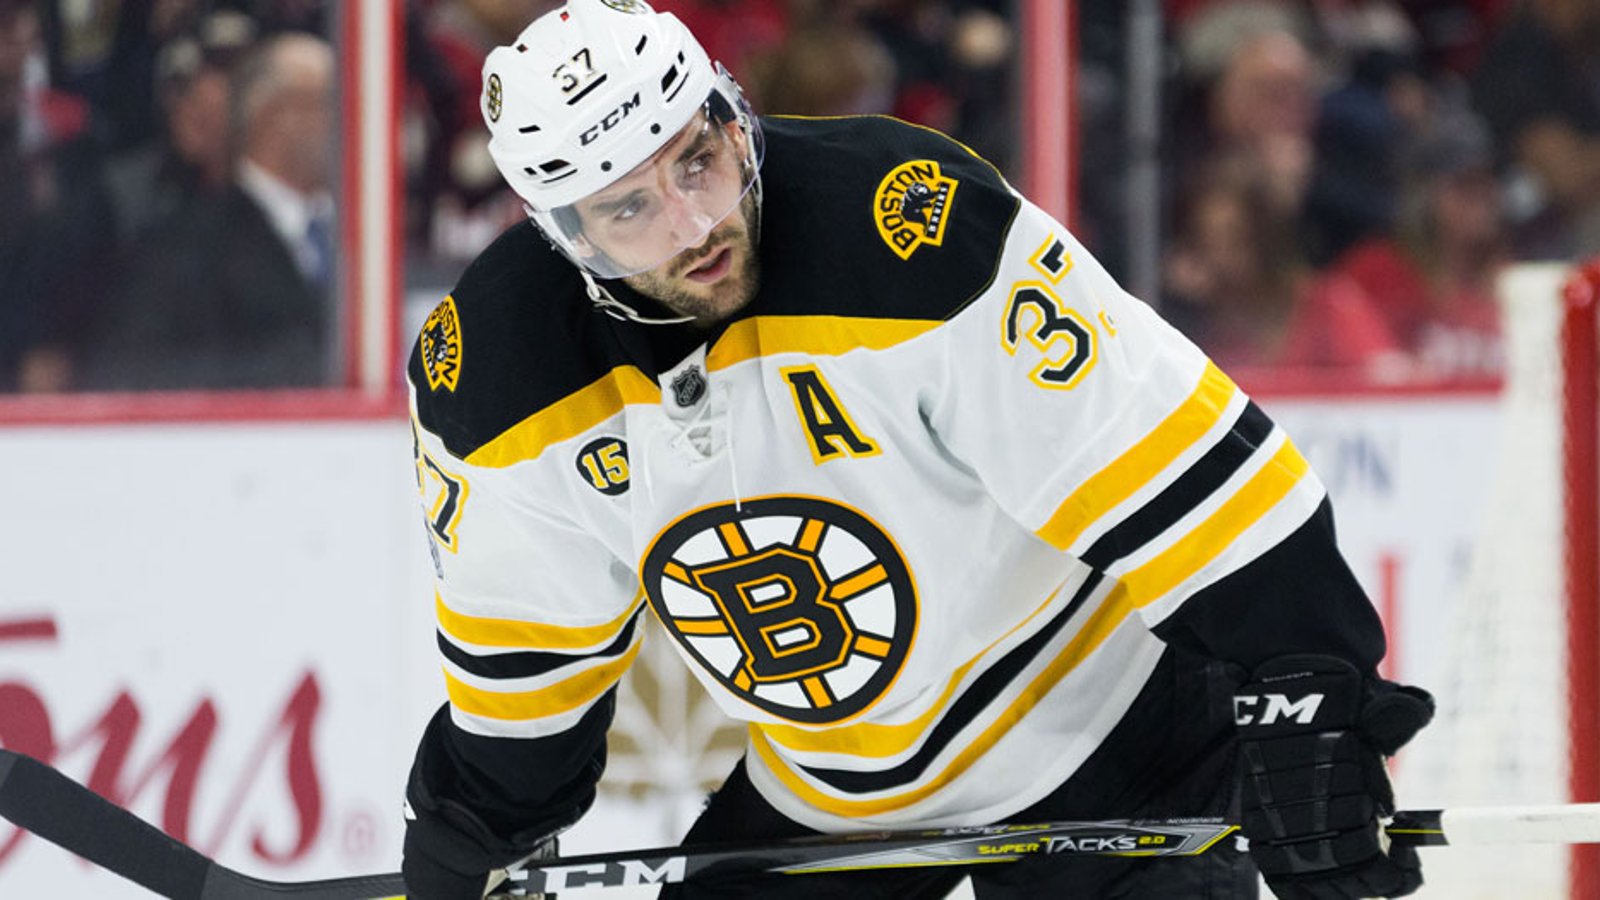 Breaking: Patrice Bergeron may have suffered a problematic injury